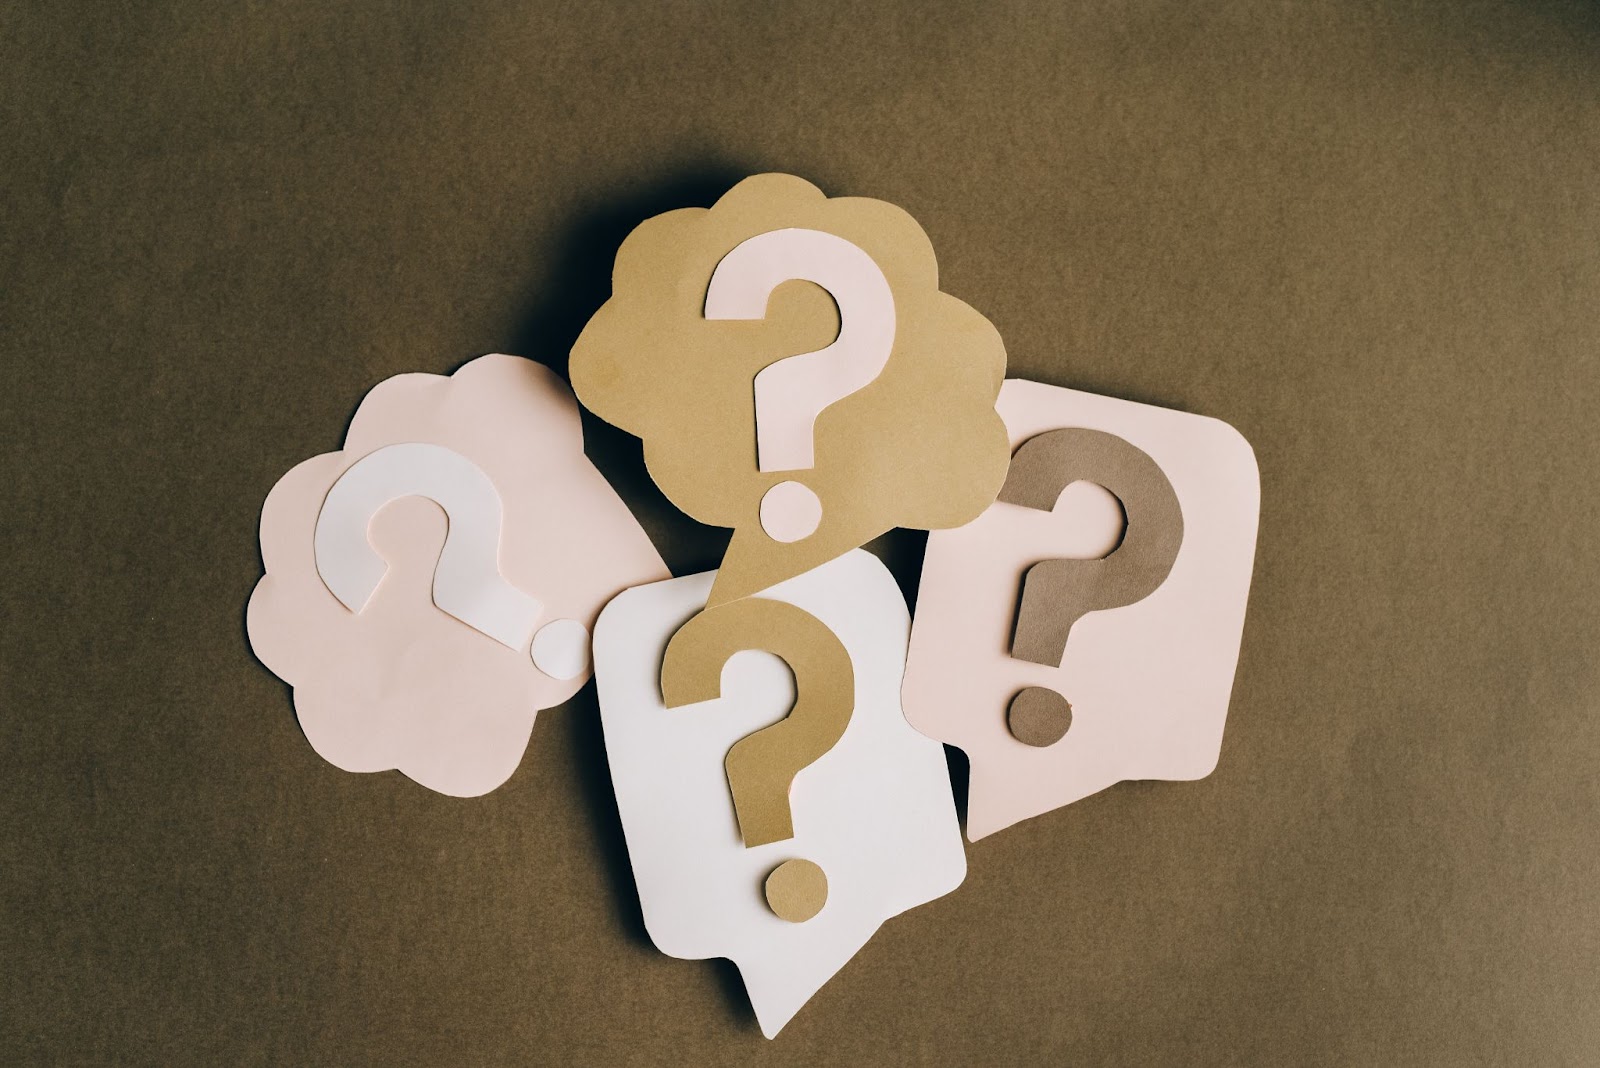 Paper cuttings of question marks against a brown background